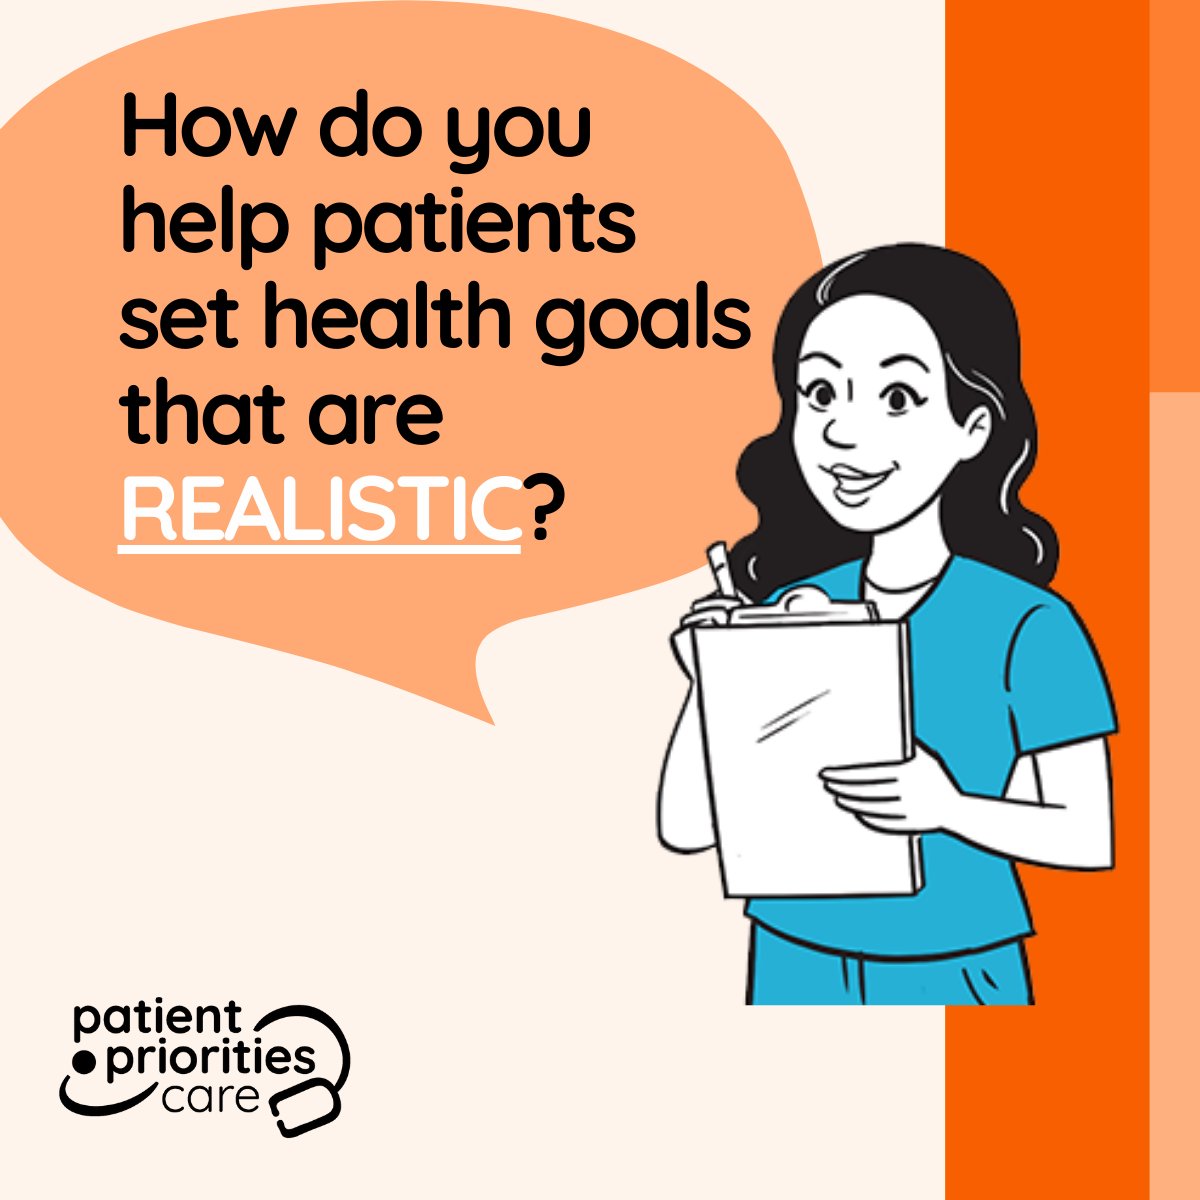 When setting health goals around #WhatMattersMost, it's important that the goal is realistic—meaning something the patient is willing and able to do. Take these four steps to help patients make a REALISTIC health goal that you can use to guide decision making and progress. 👇